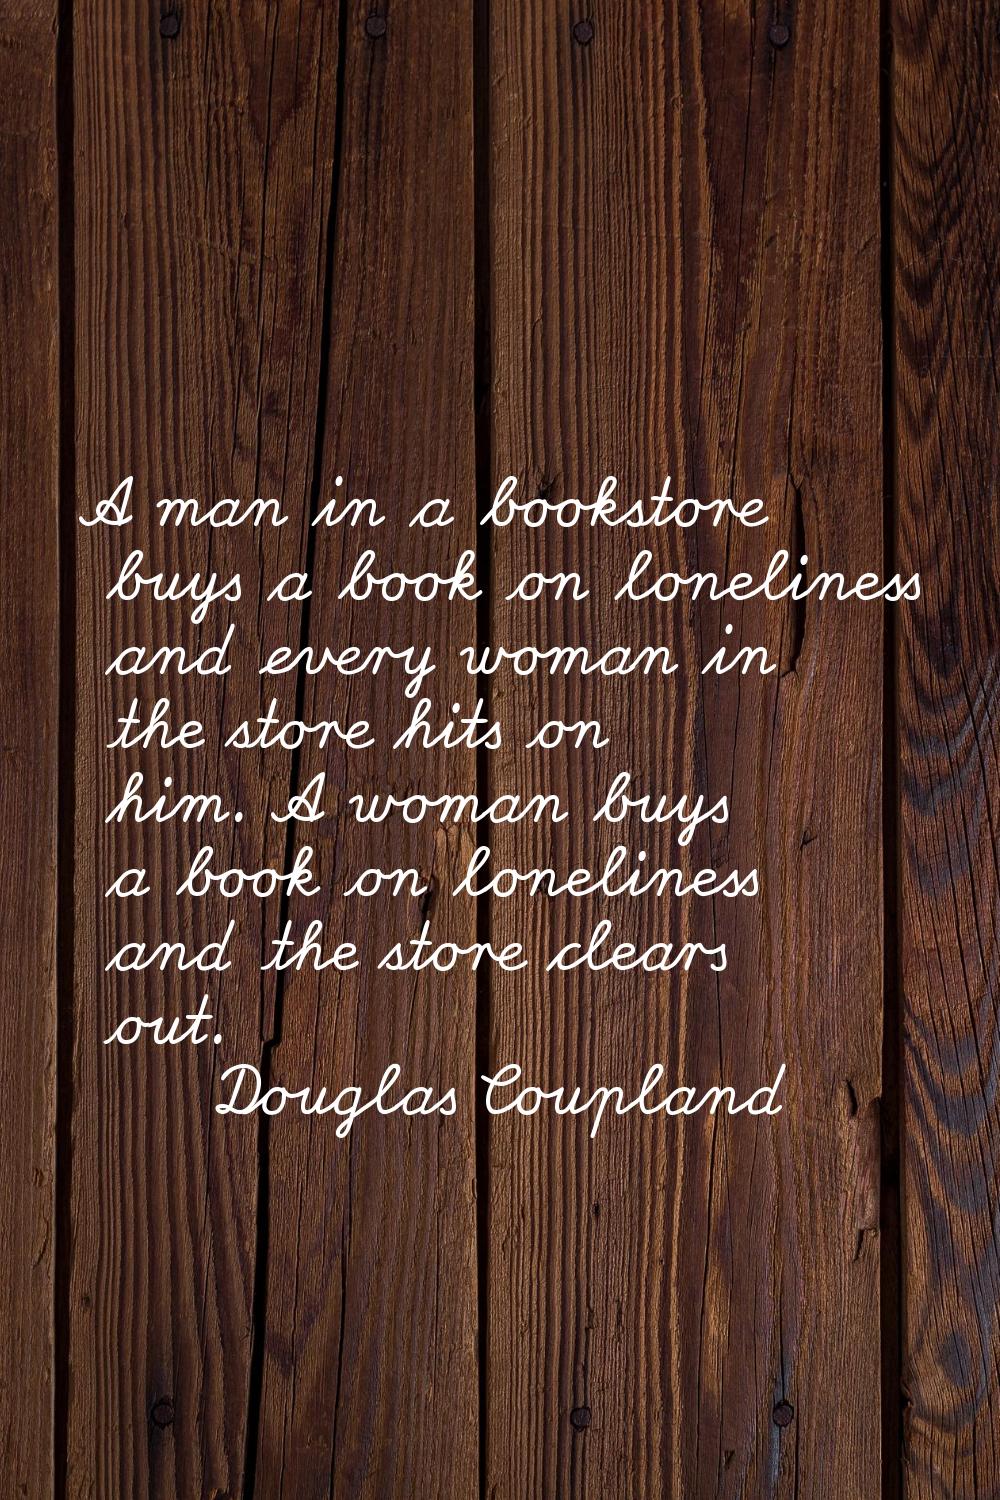 A man in a bookstore buys a book on loneliness and every woman in the store hits on him. A woman bu